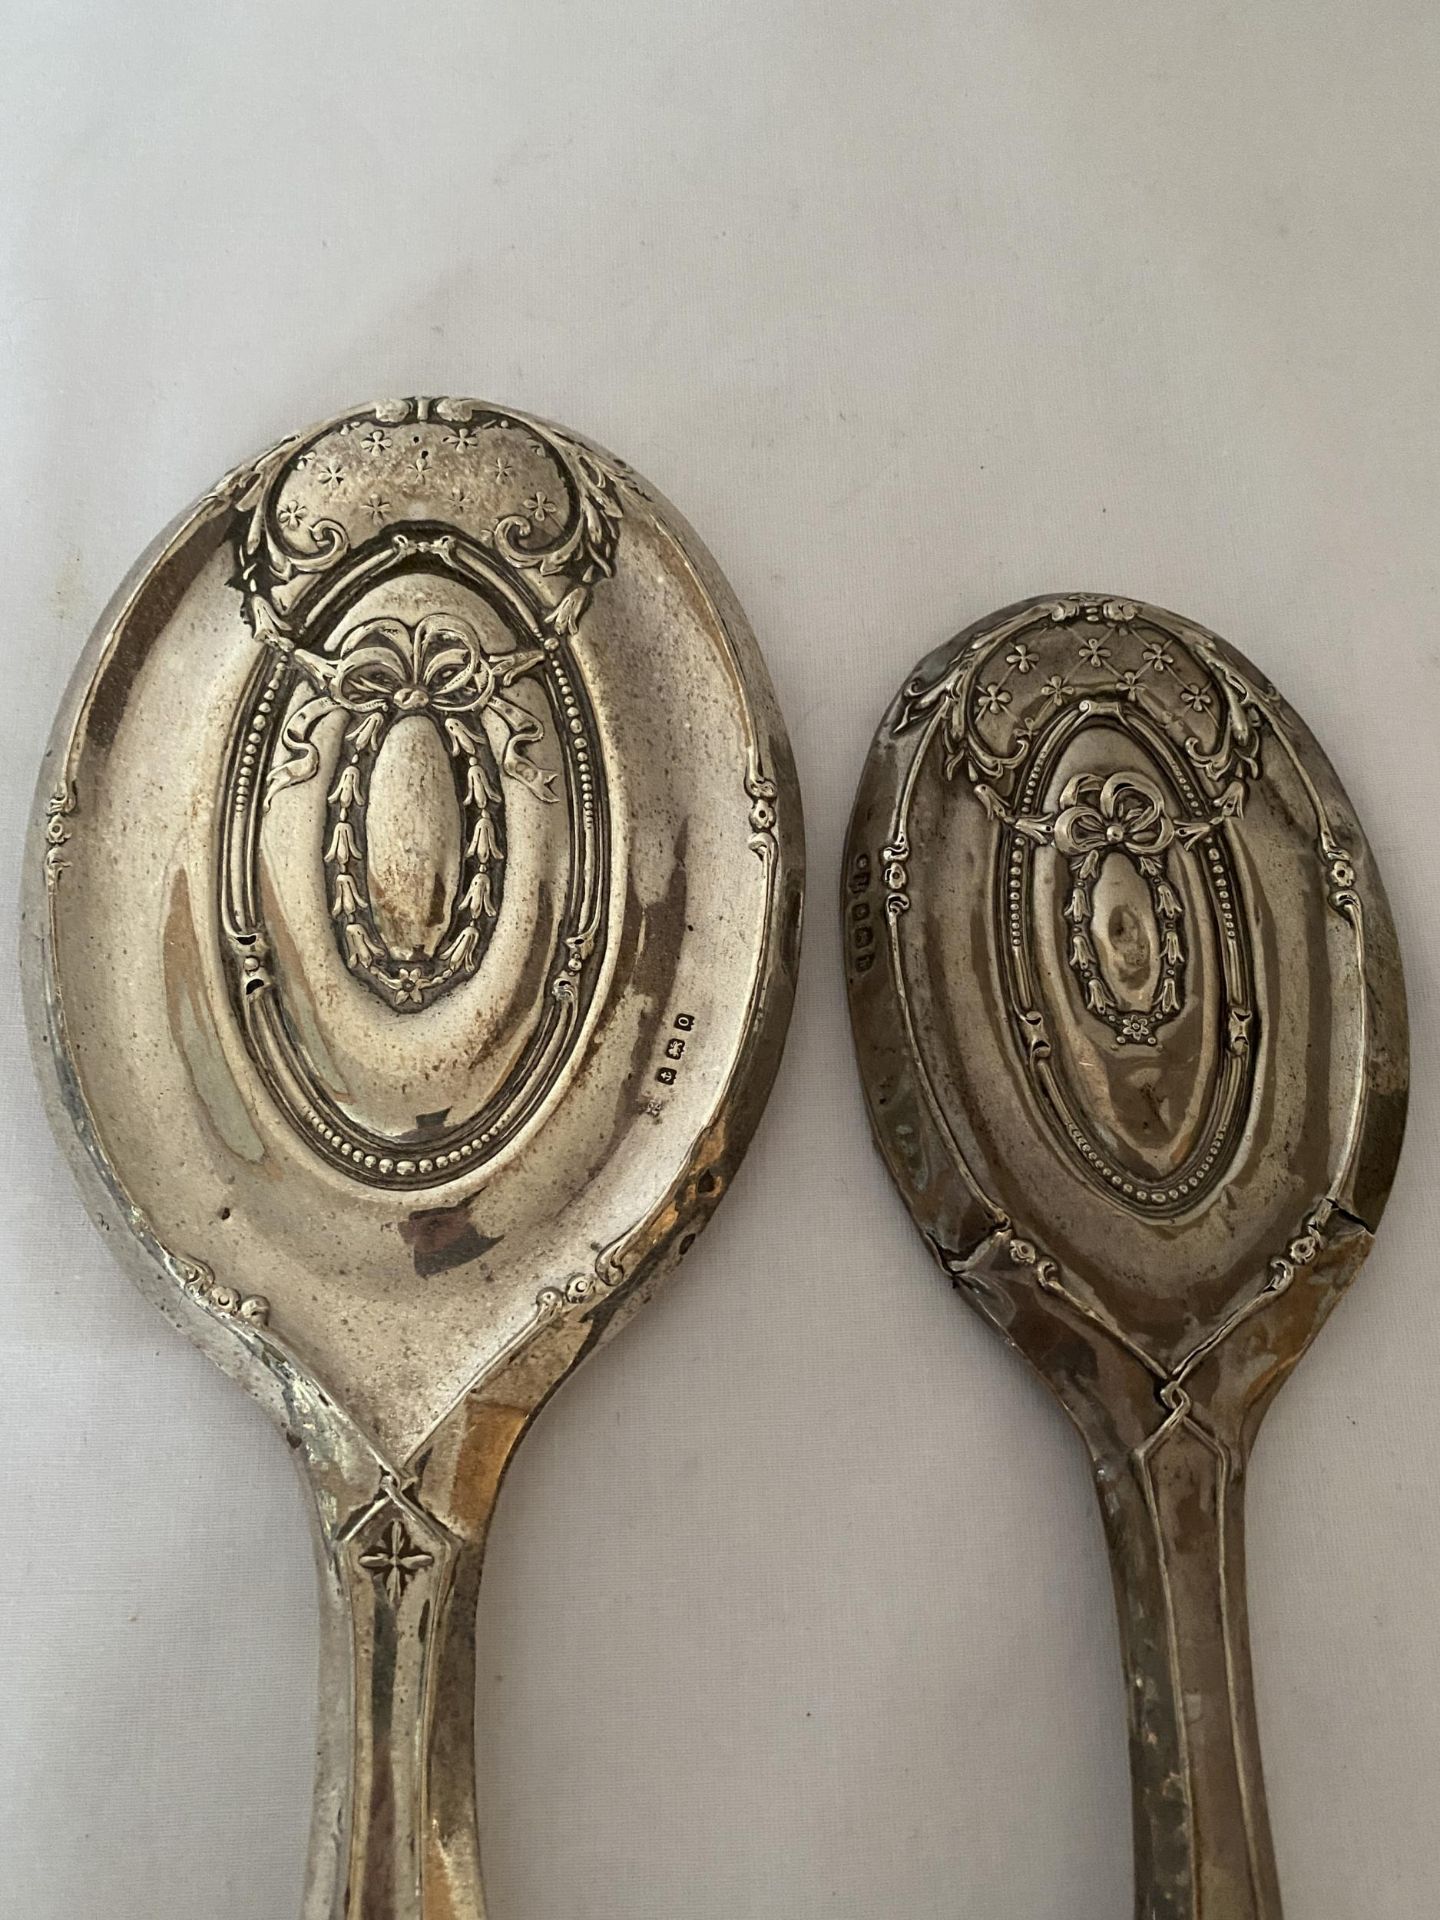 TWO HALLMARKED BIRMINGHAM SILVER BACKED HAND MIRRORS, EARLIEST DATING TO 1913 - Image 5 of 18